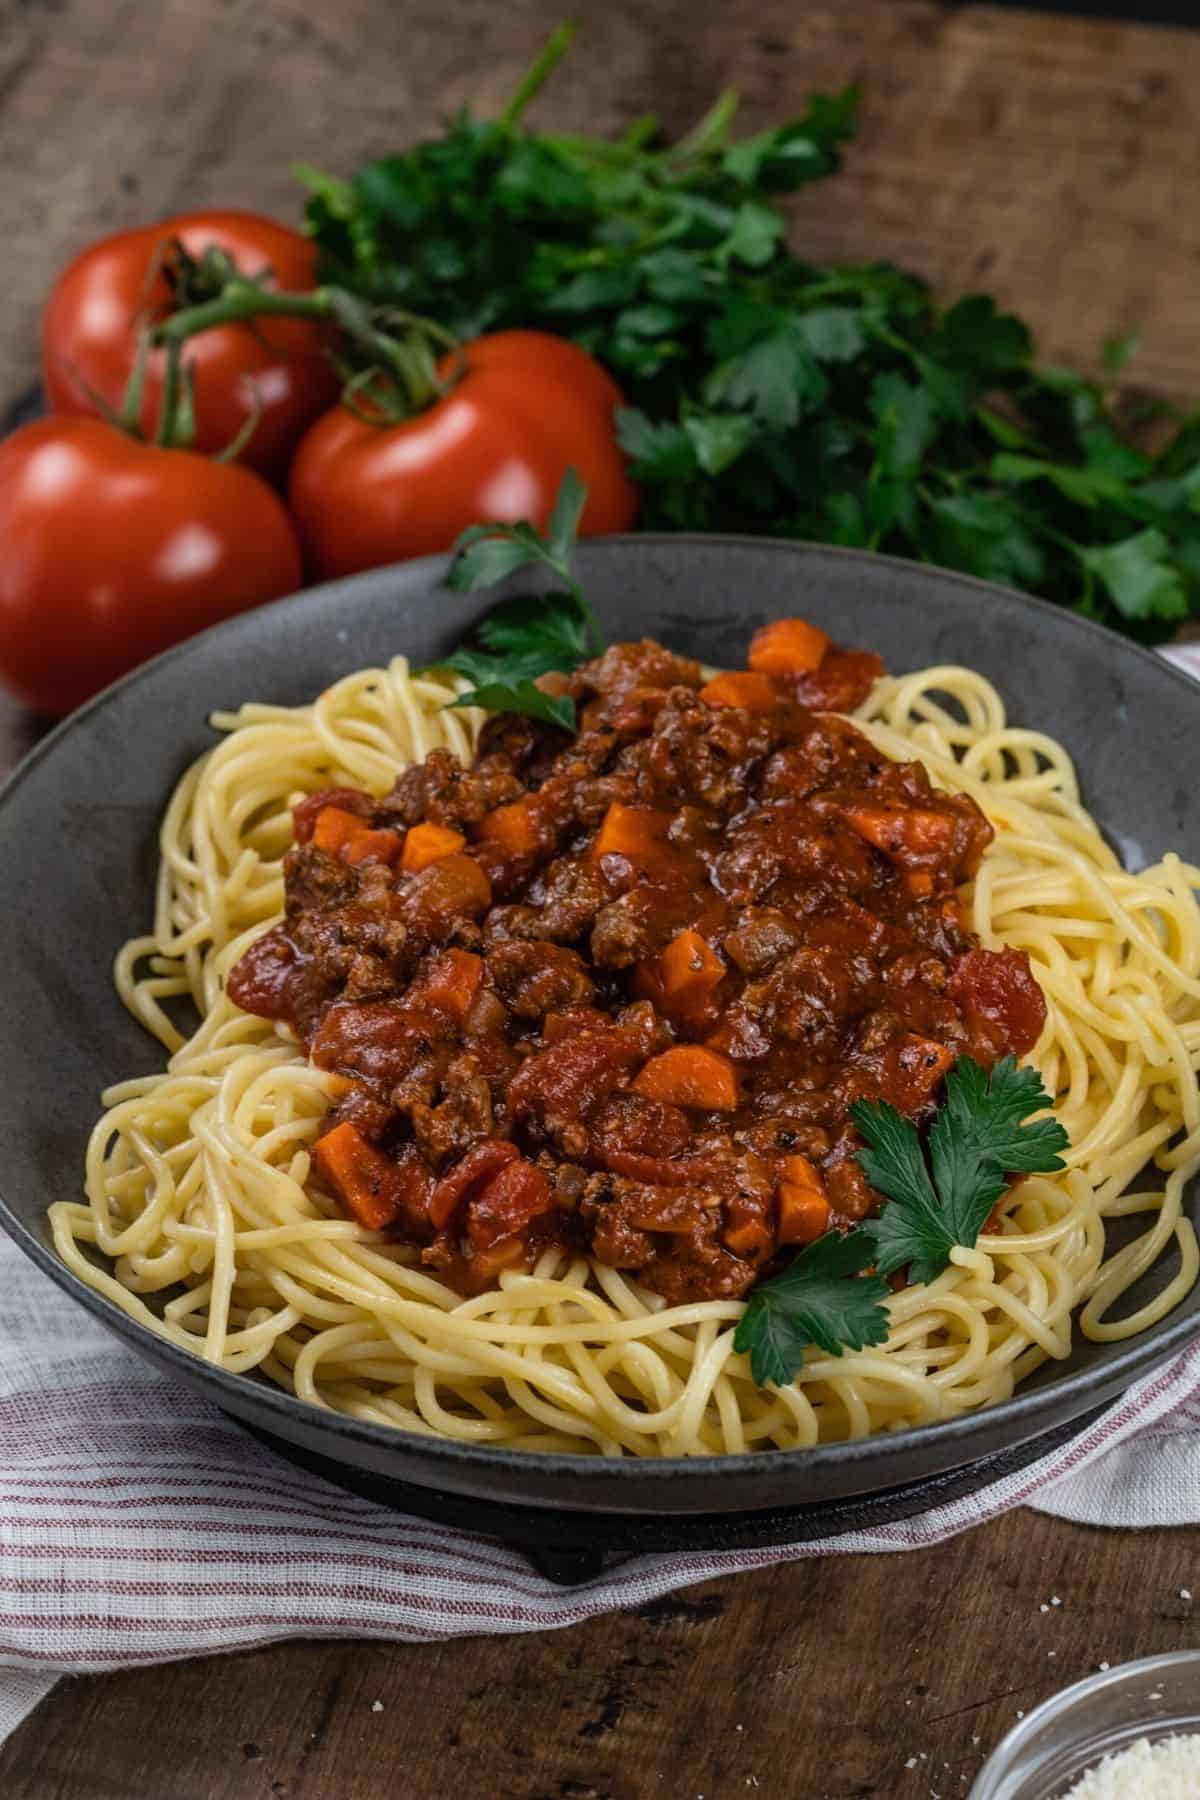 Side view of a big bowl filled with spaghetti and beef bolognese sauce is sprinkled with fresh parsley. More parsley, tomatoes, and a small bowl of parmesan cheese are next to the bowl as it rests on a red and white towel on a wood table.